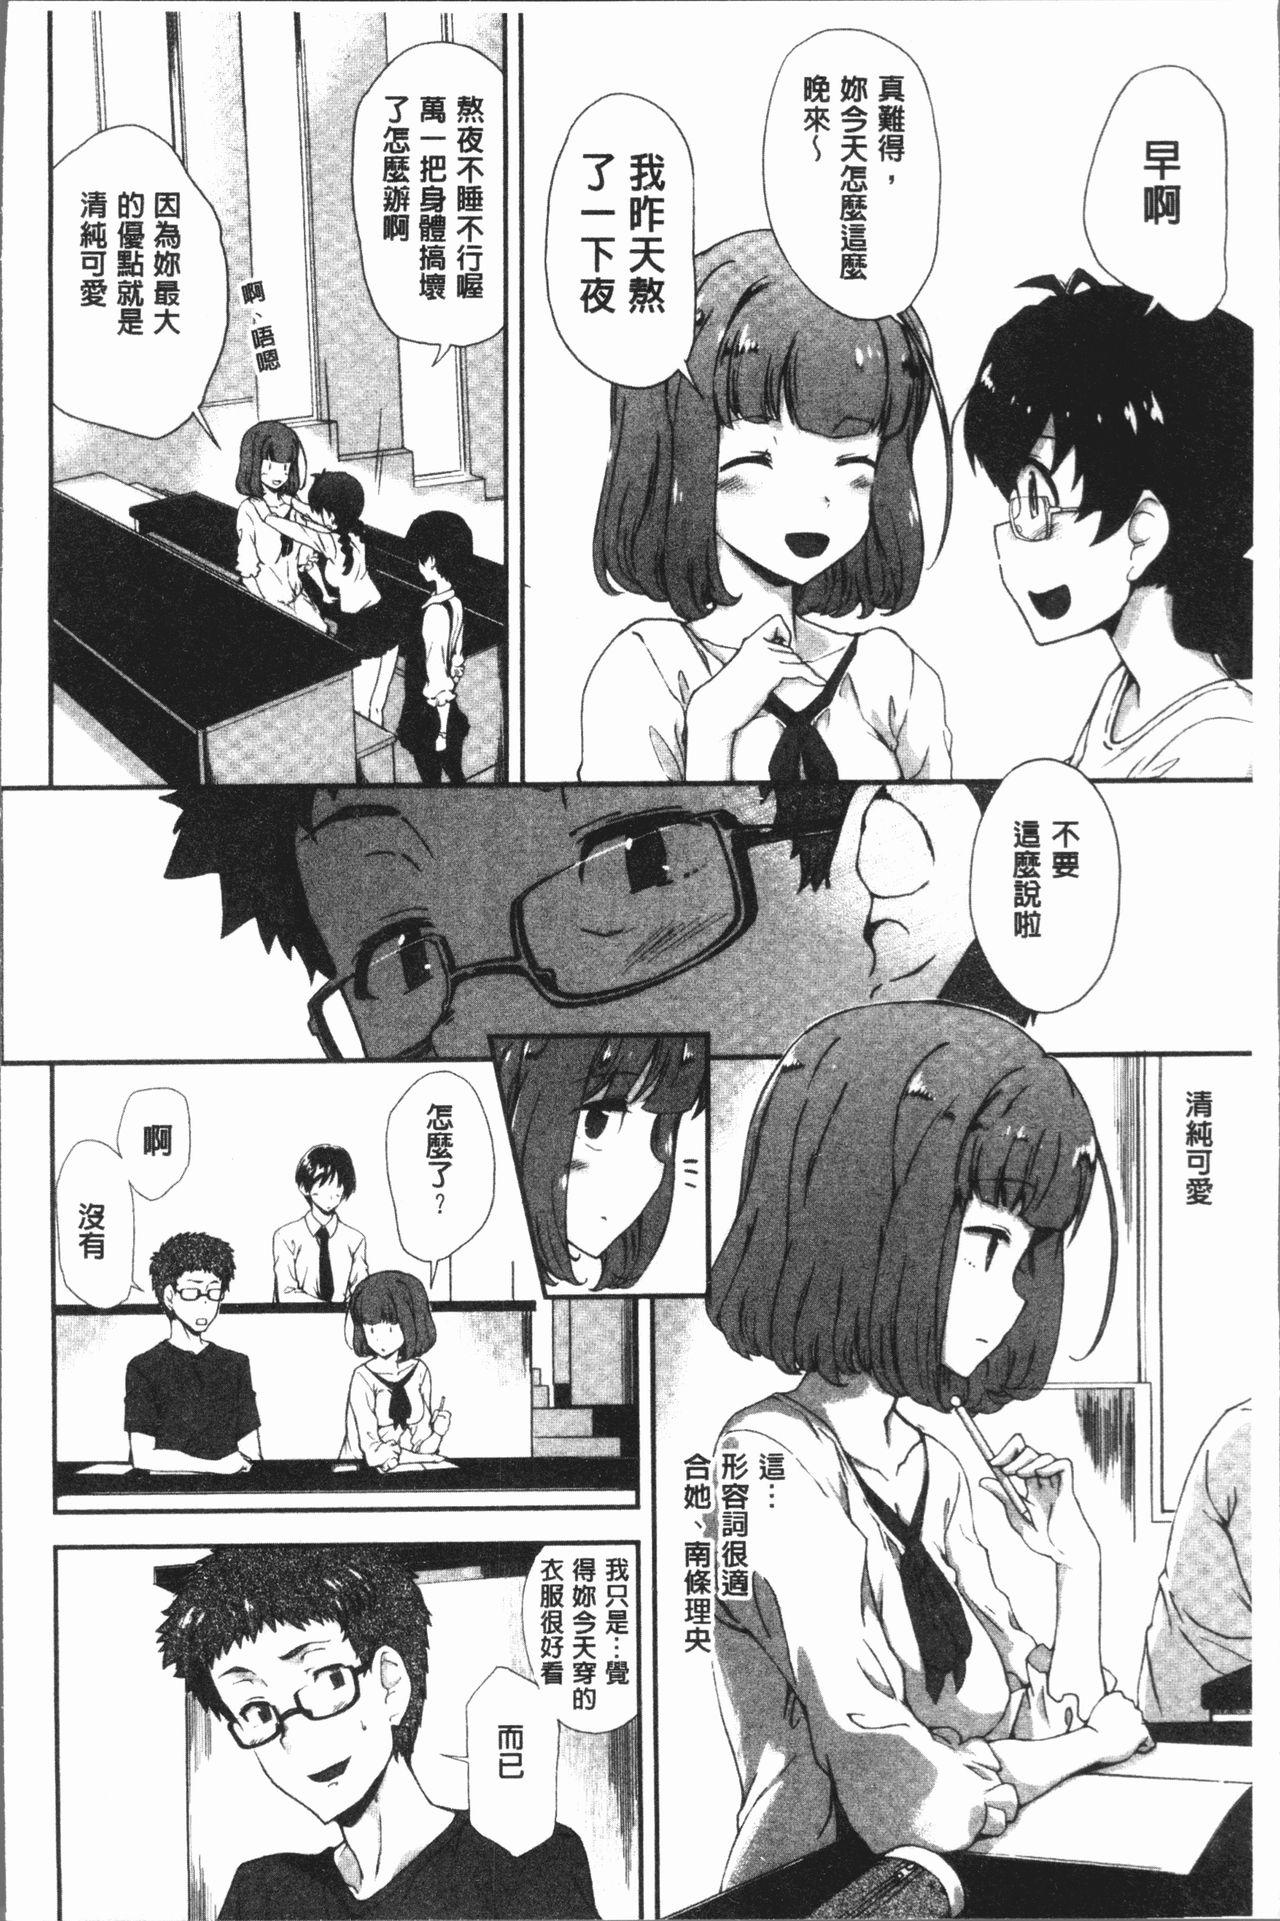 Boss Mienai Tokoro de - I almost can see you | 在看不到的地方做 Caught - Page 6